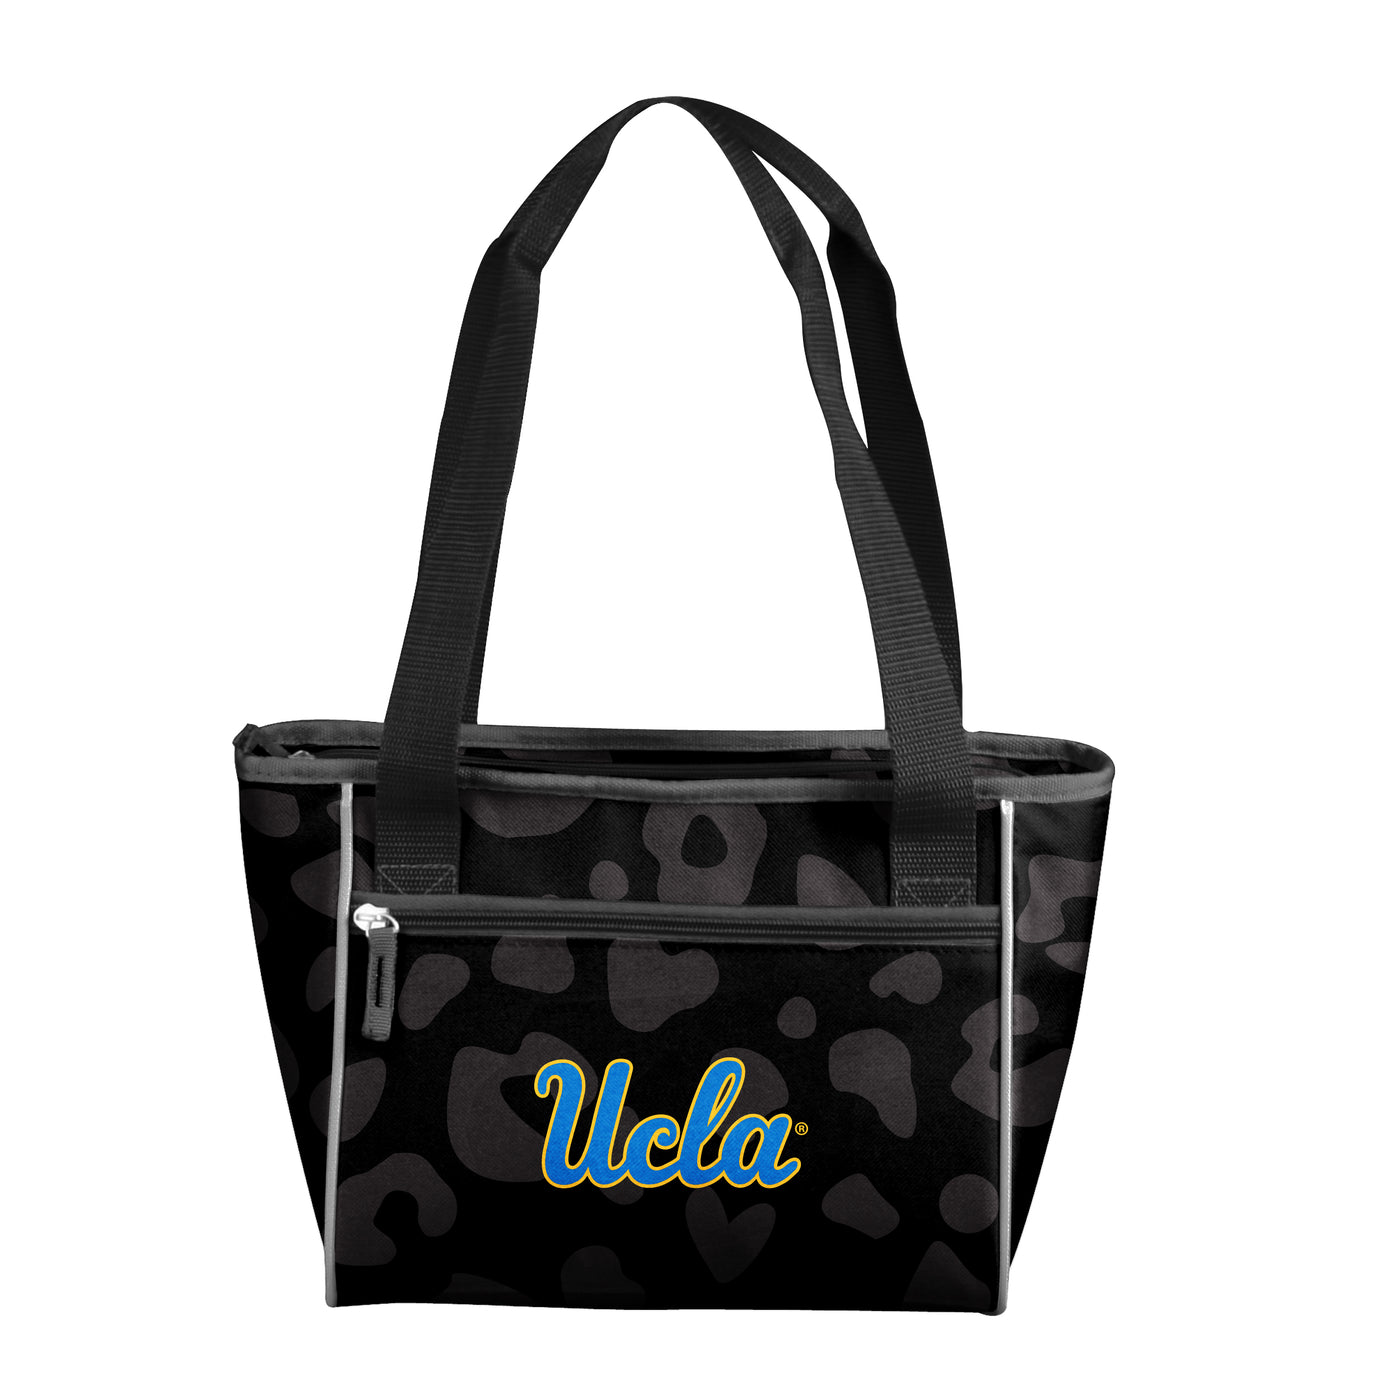 UCLA Leopard Print 16 Can Cooler Tote